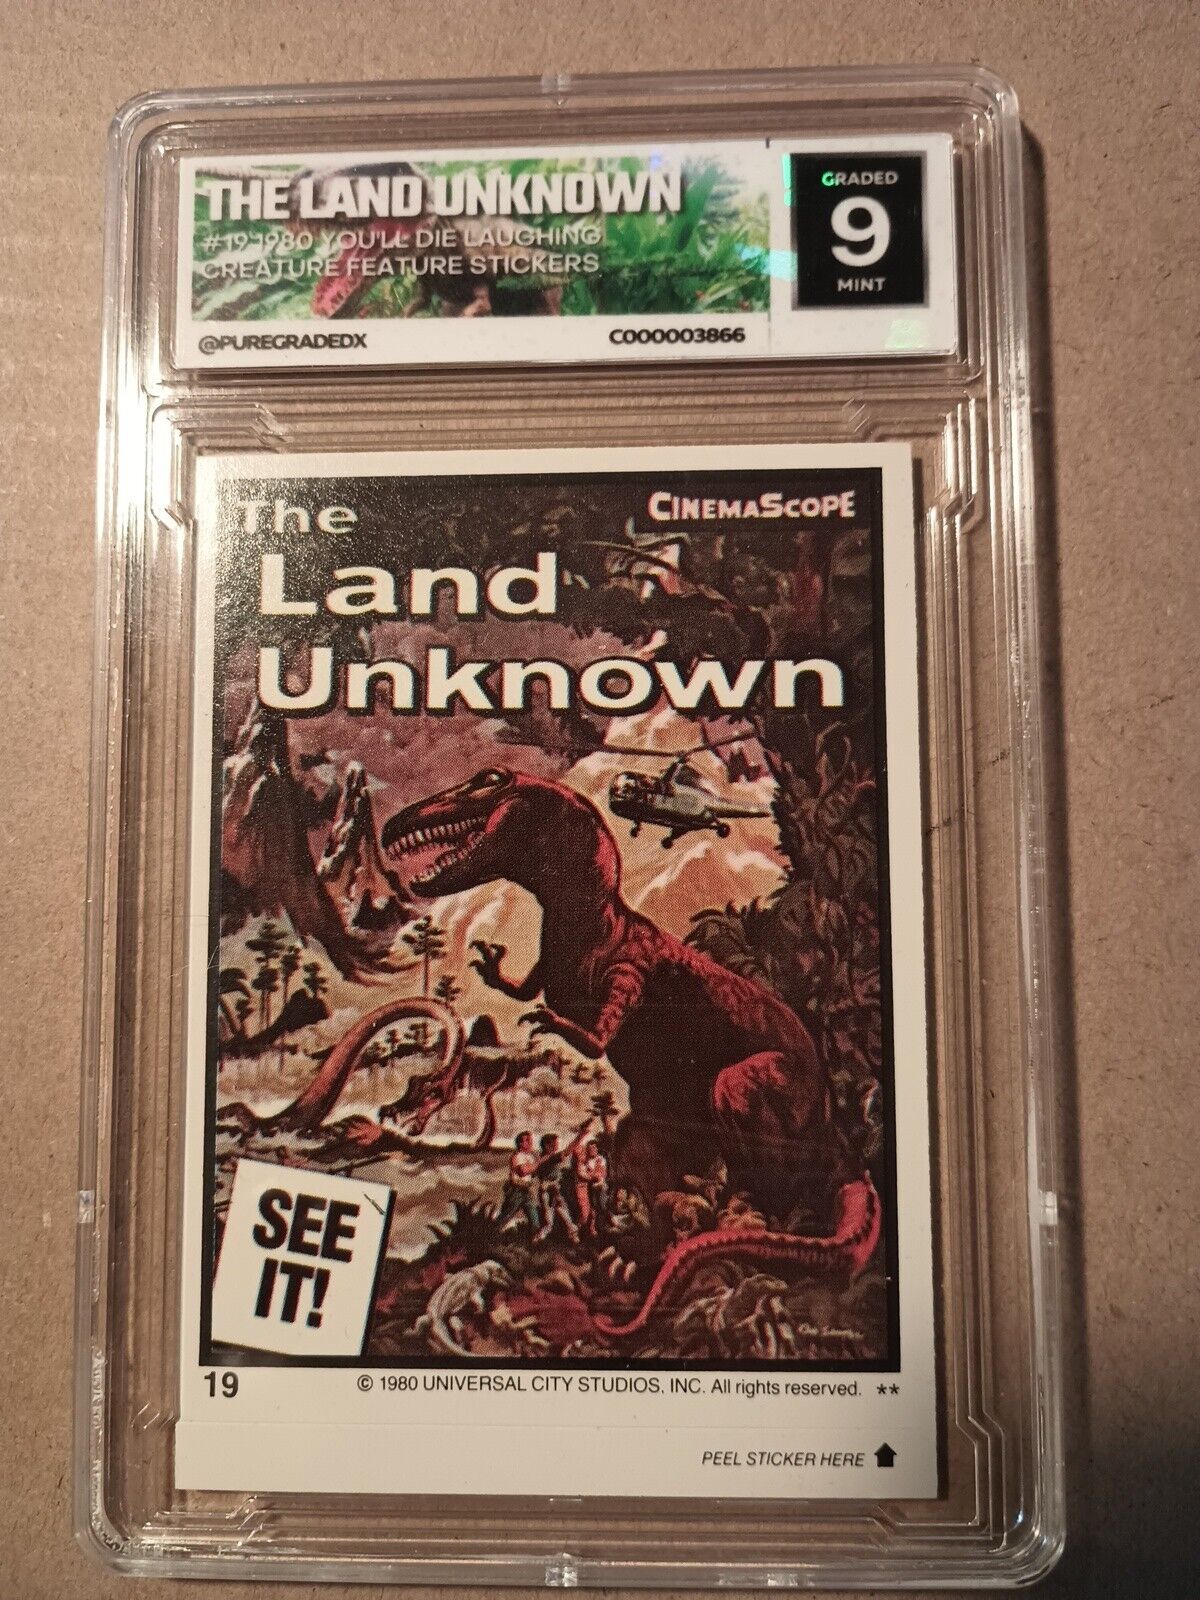 THE LAND UNKNOWN 1980 TOPPS FEATURE MONSTER STICKERS #20 PXG 9 CUSTOM LABEL